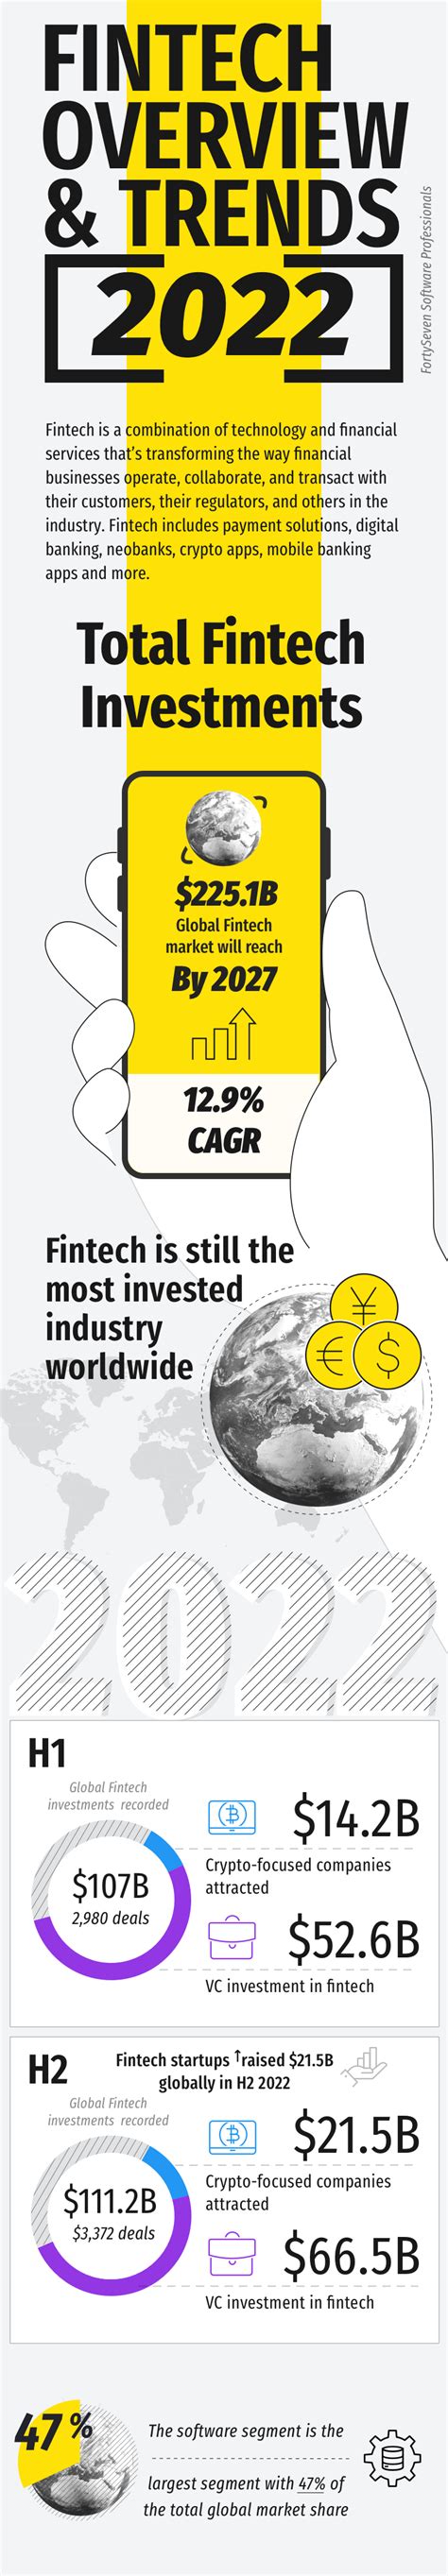 Infographic Fintech Overview And Trends 2022 Fortyseven